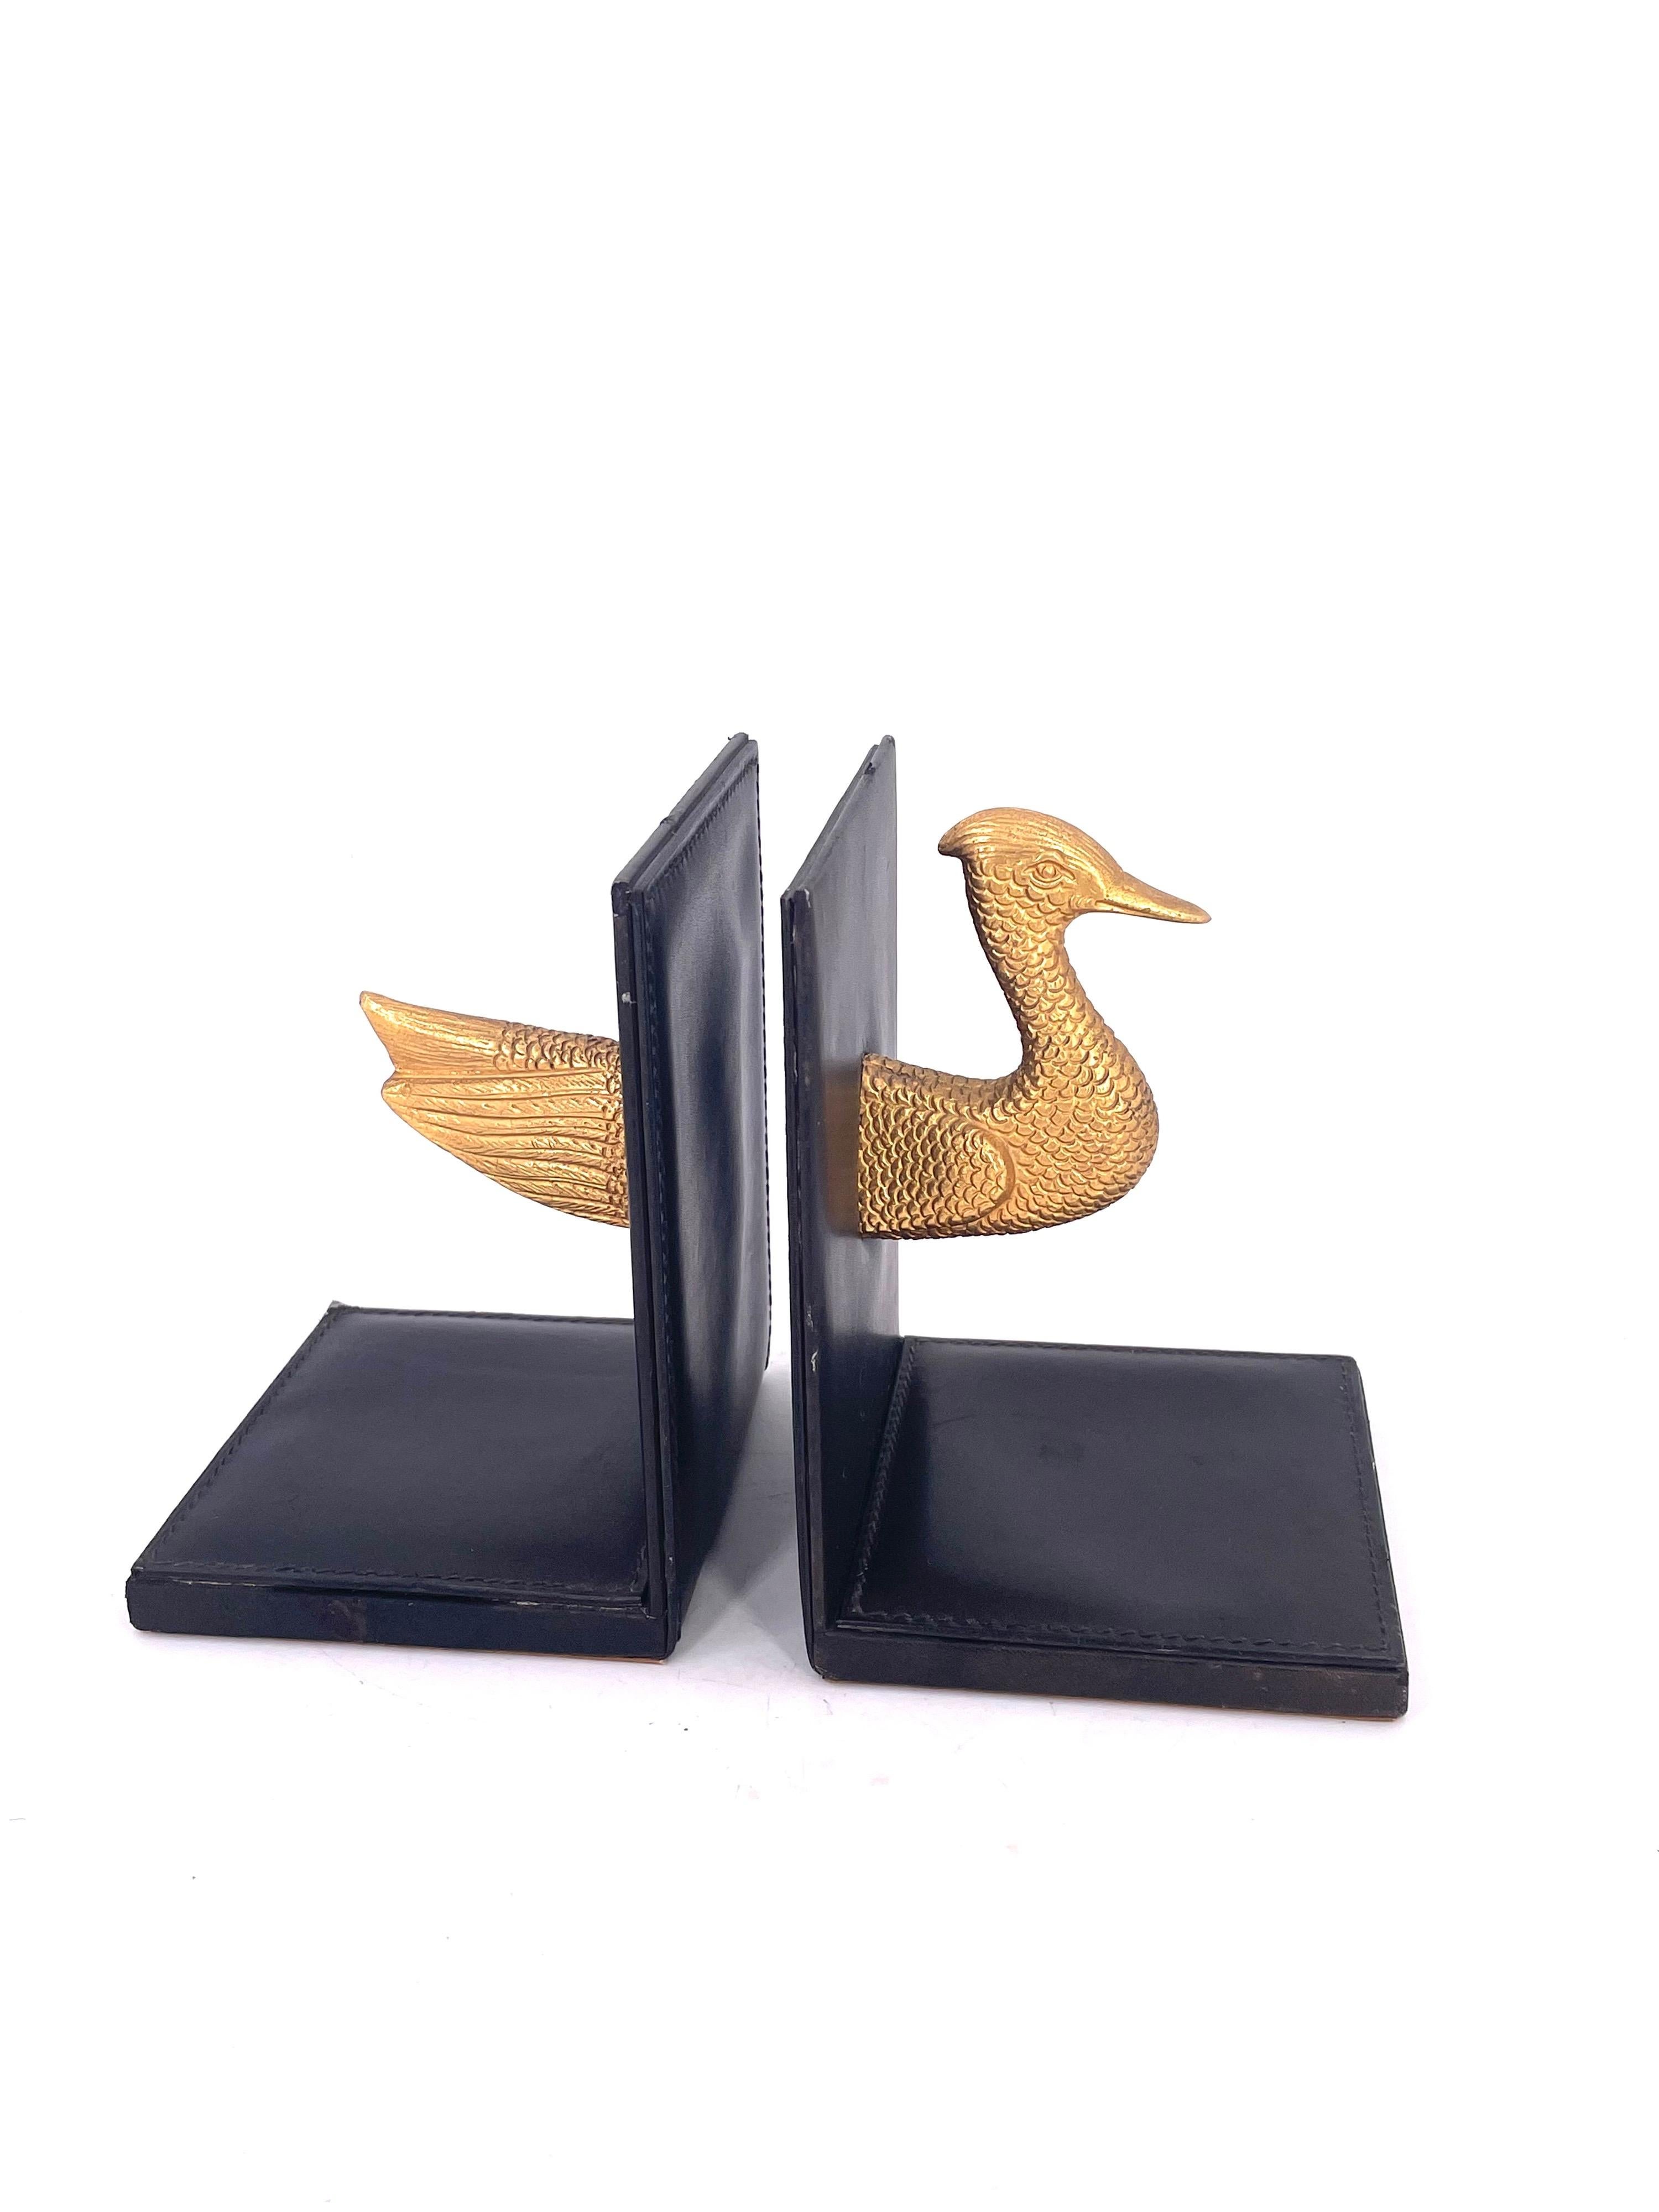 Hollywood Regency Gold Guild Bronze & Leather Italian Bookends In Good Condition For Sale In San Diego, CA